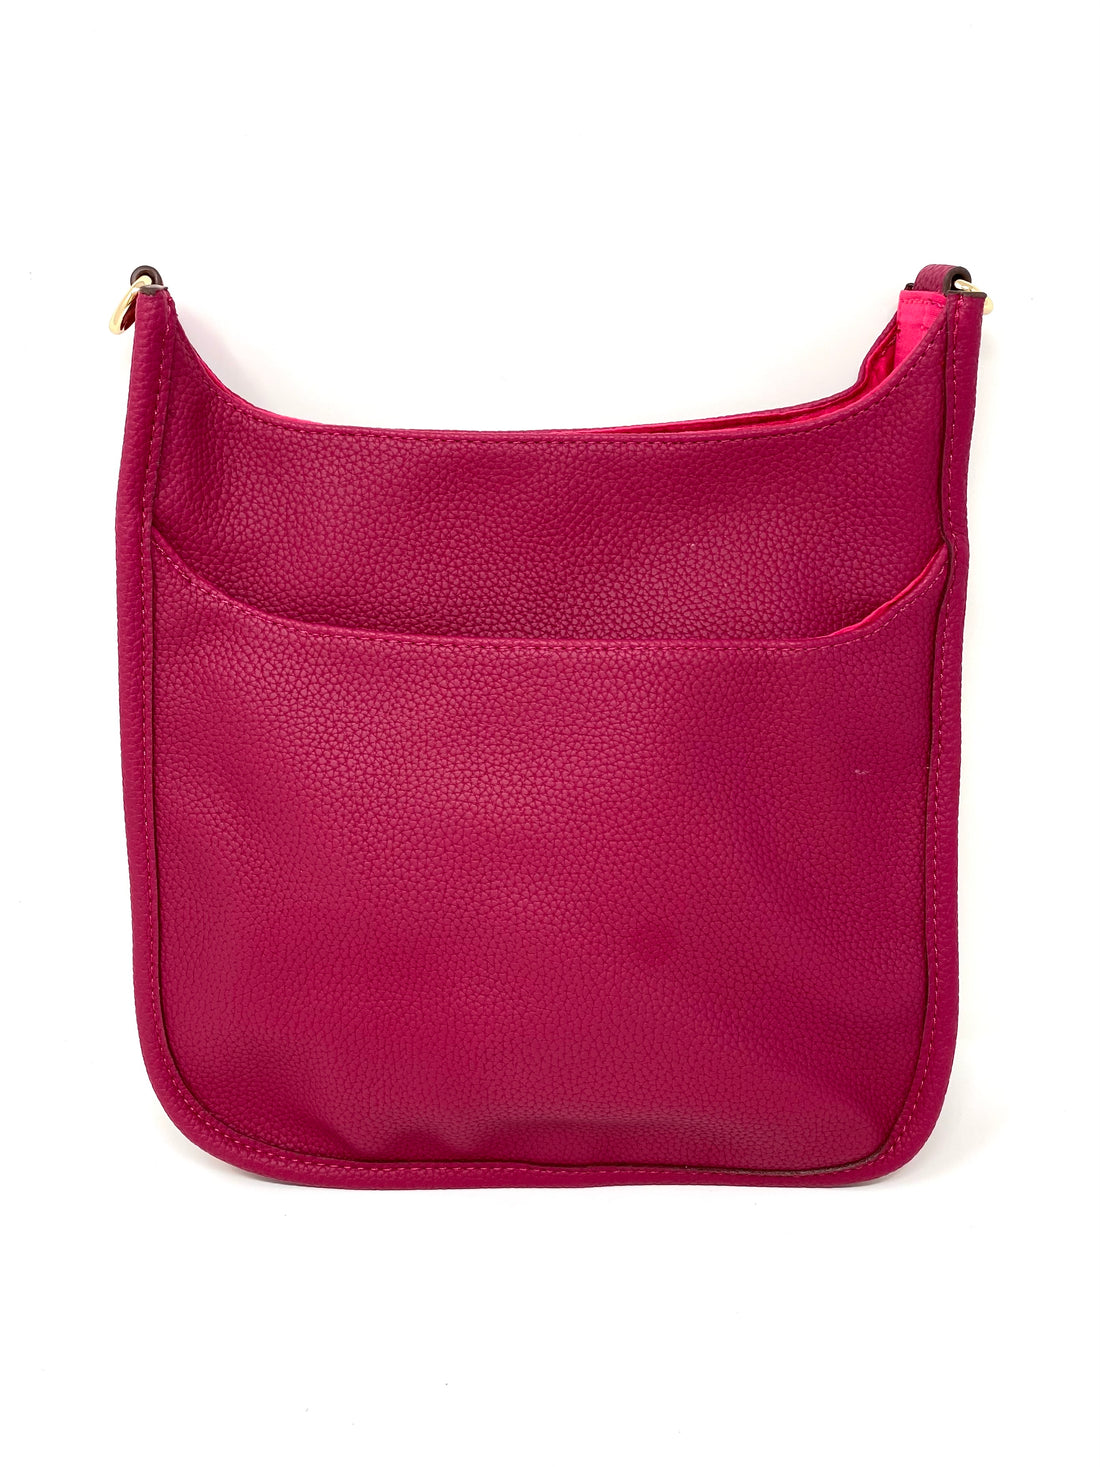 Saddle Bag in Vegan Leather in Berry